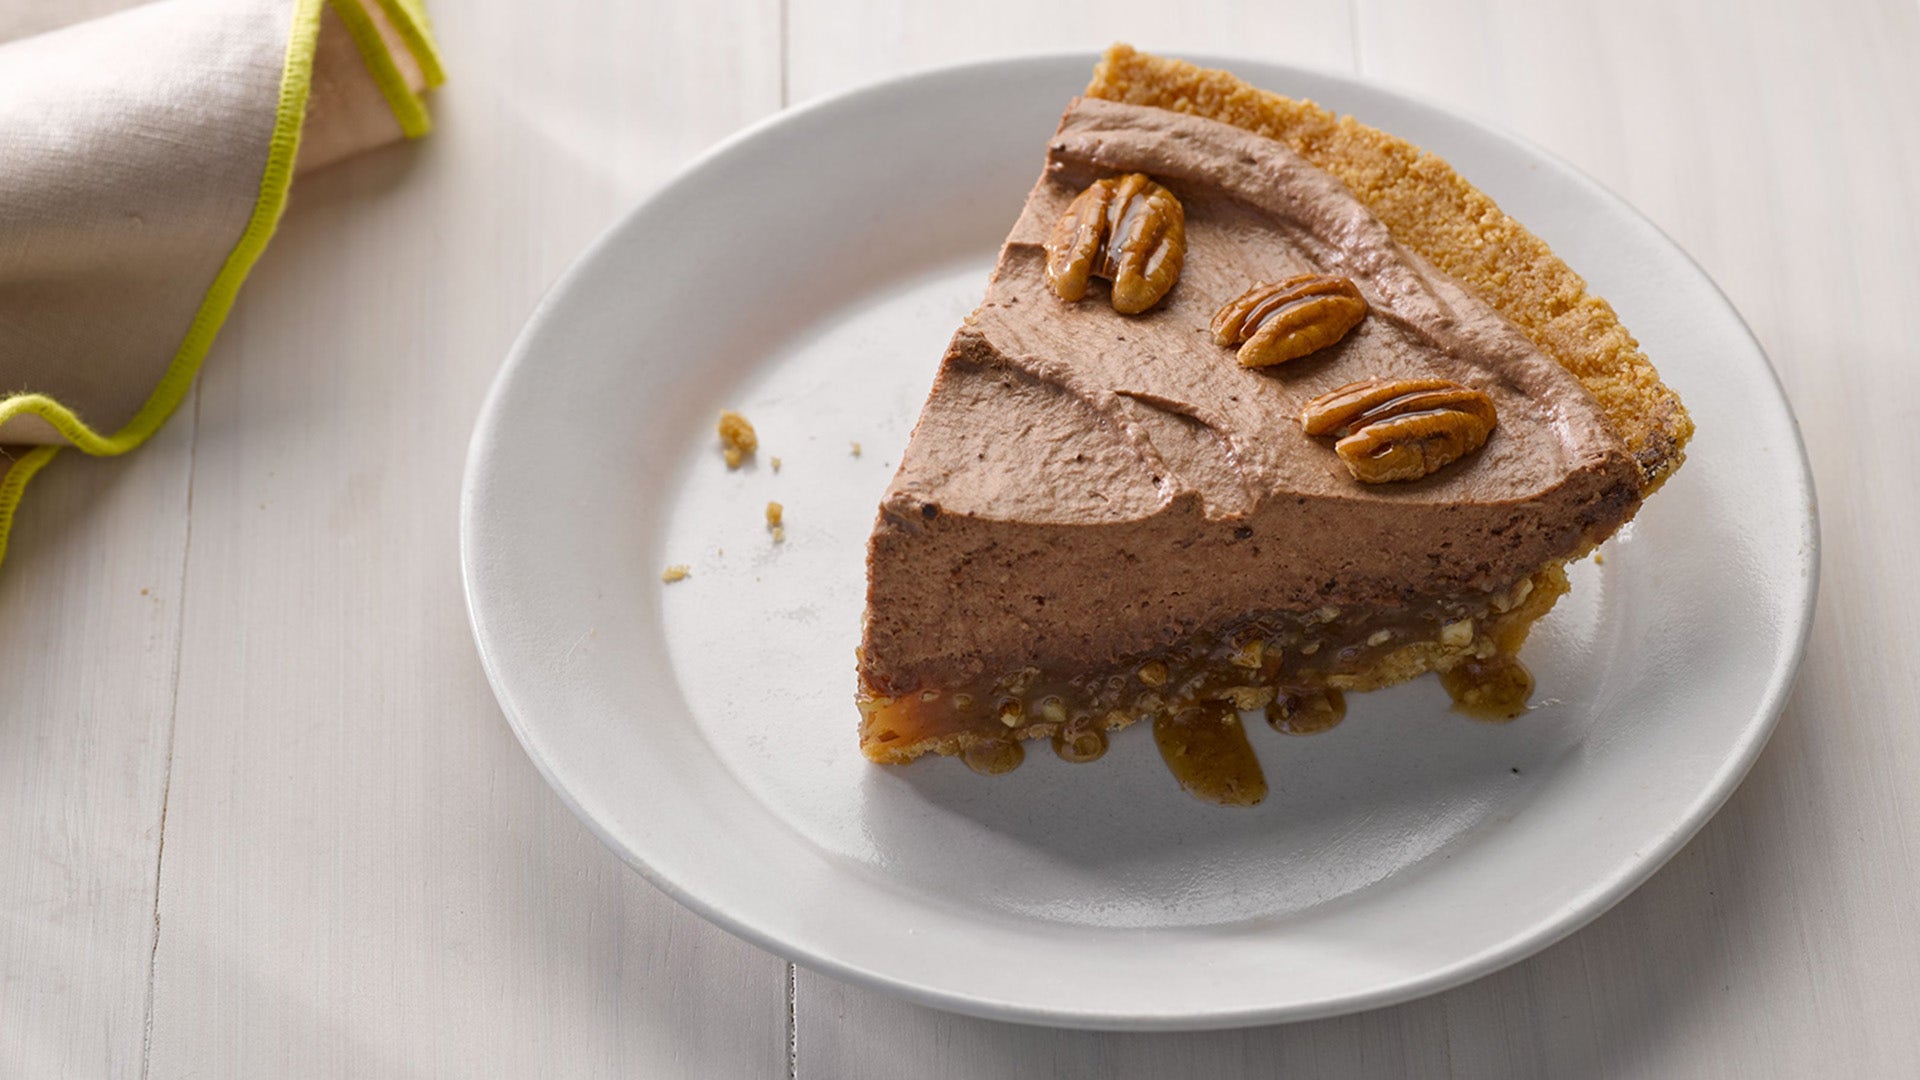 Chocolate Mousse and Praline Pie